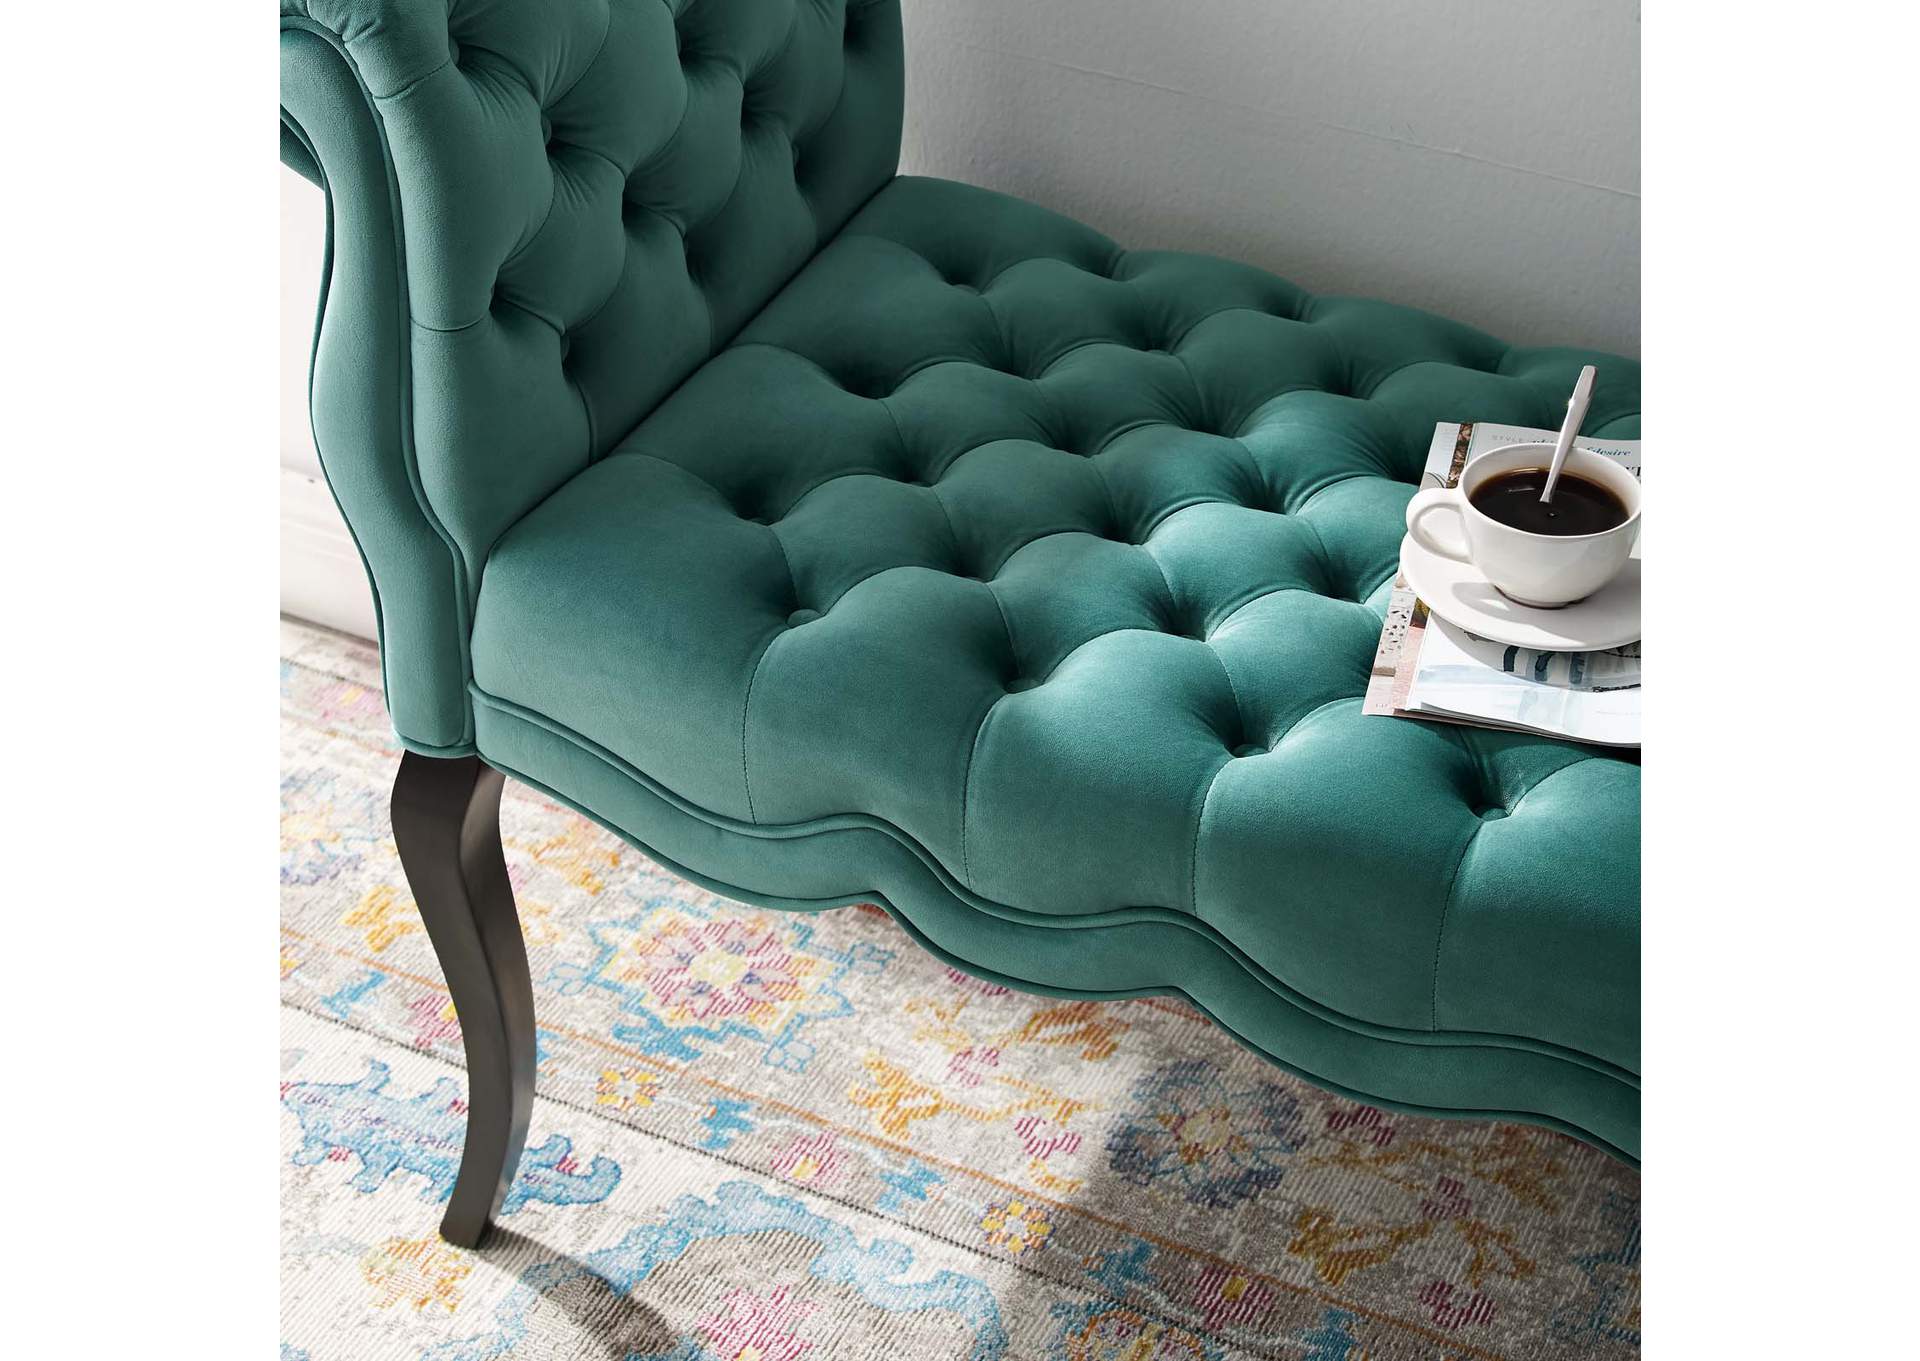 Teal Adelia Chesterfield Style Button Tufted Performance Velvet Bench,Modway